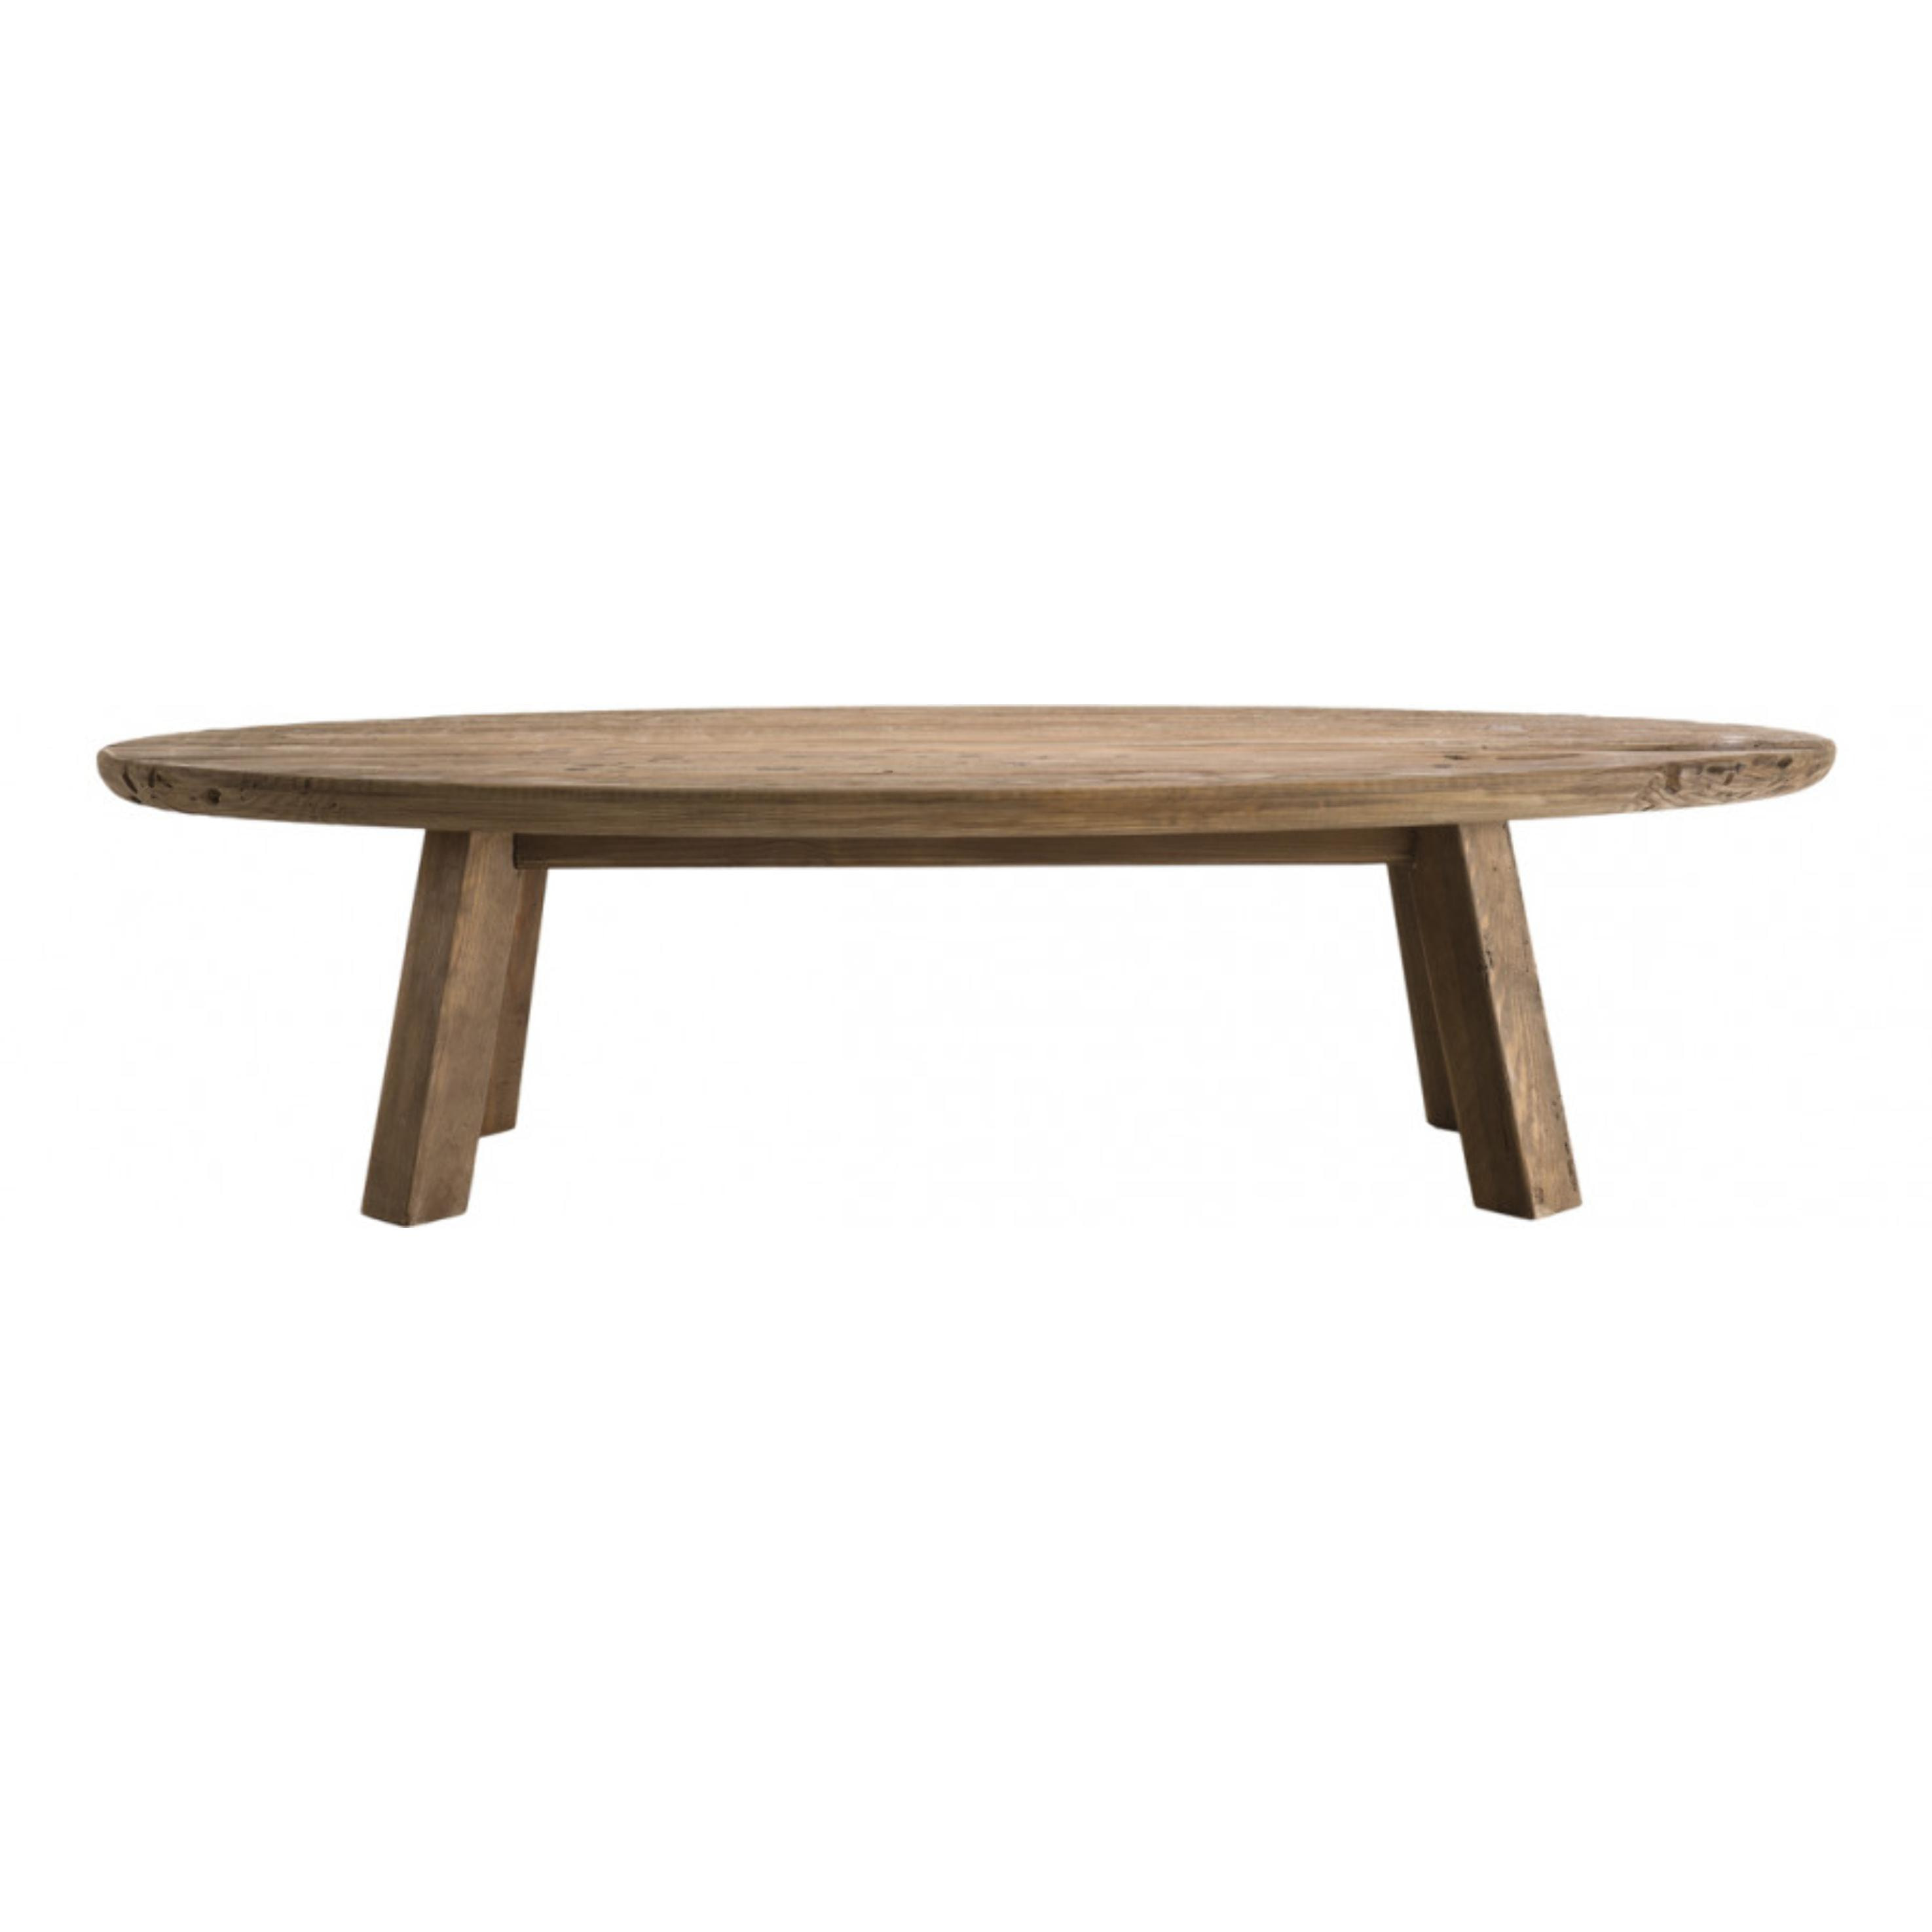 ANDRIAN - Table basse ovale marron bois Pin recyclé